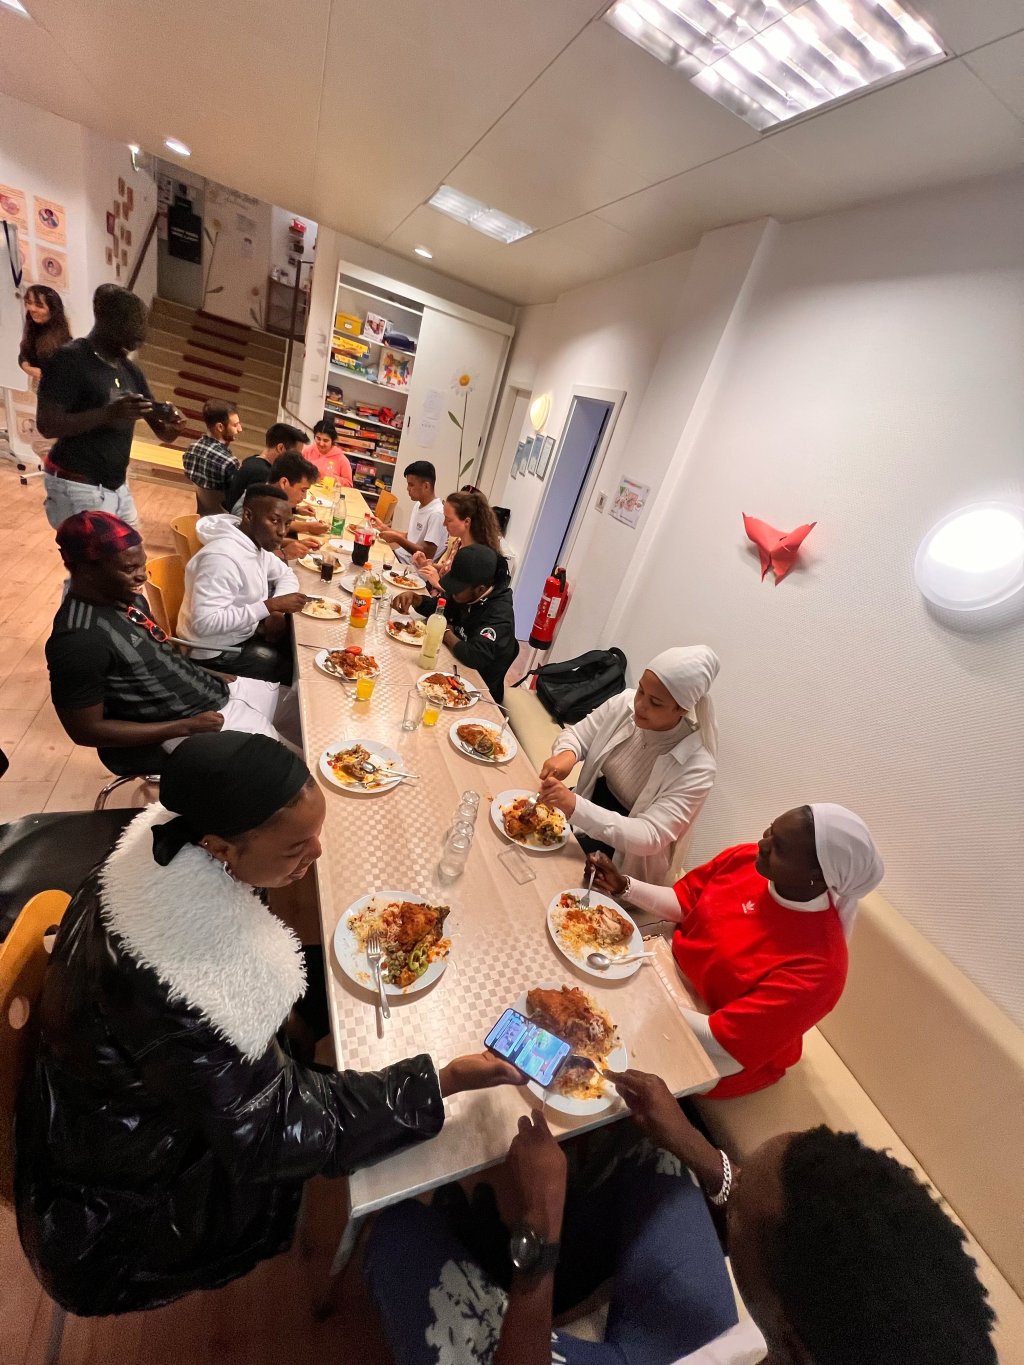 Buddies of Bremen brings together young migrants to share food and friendship | Photo: private